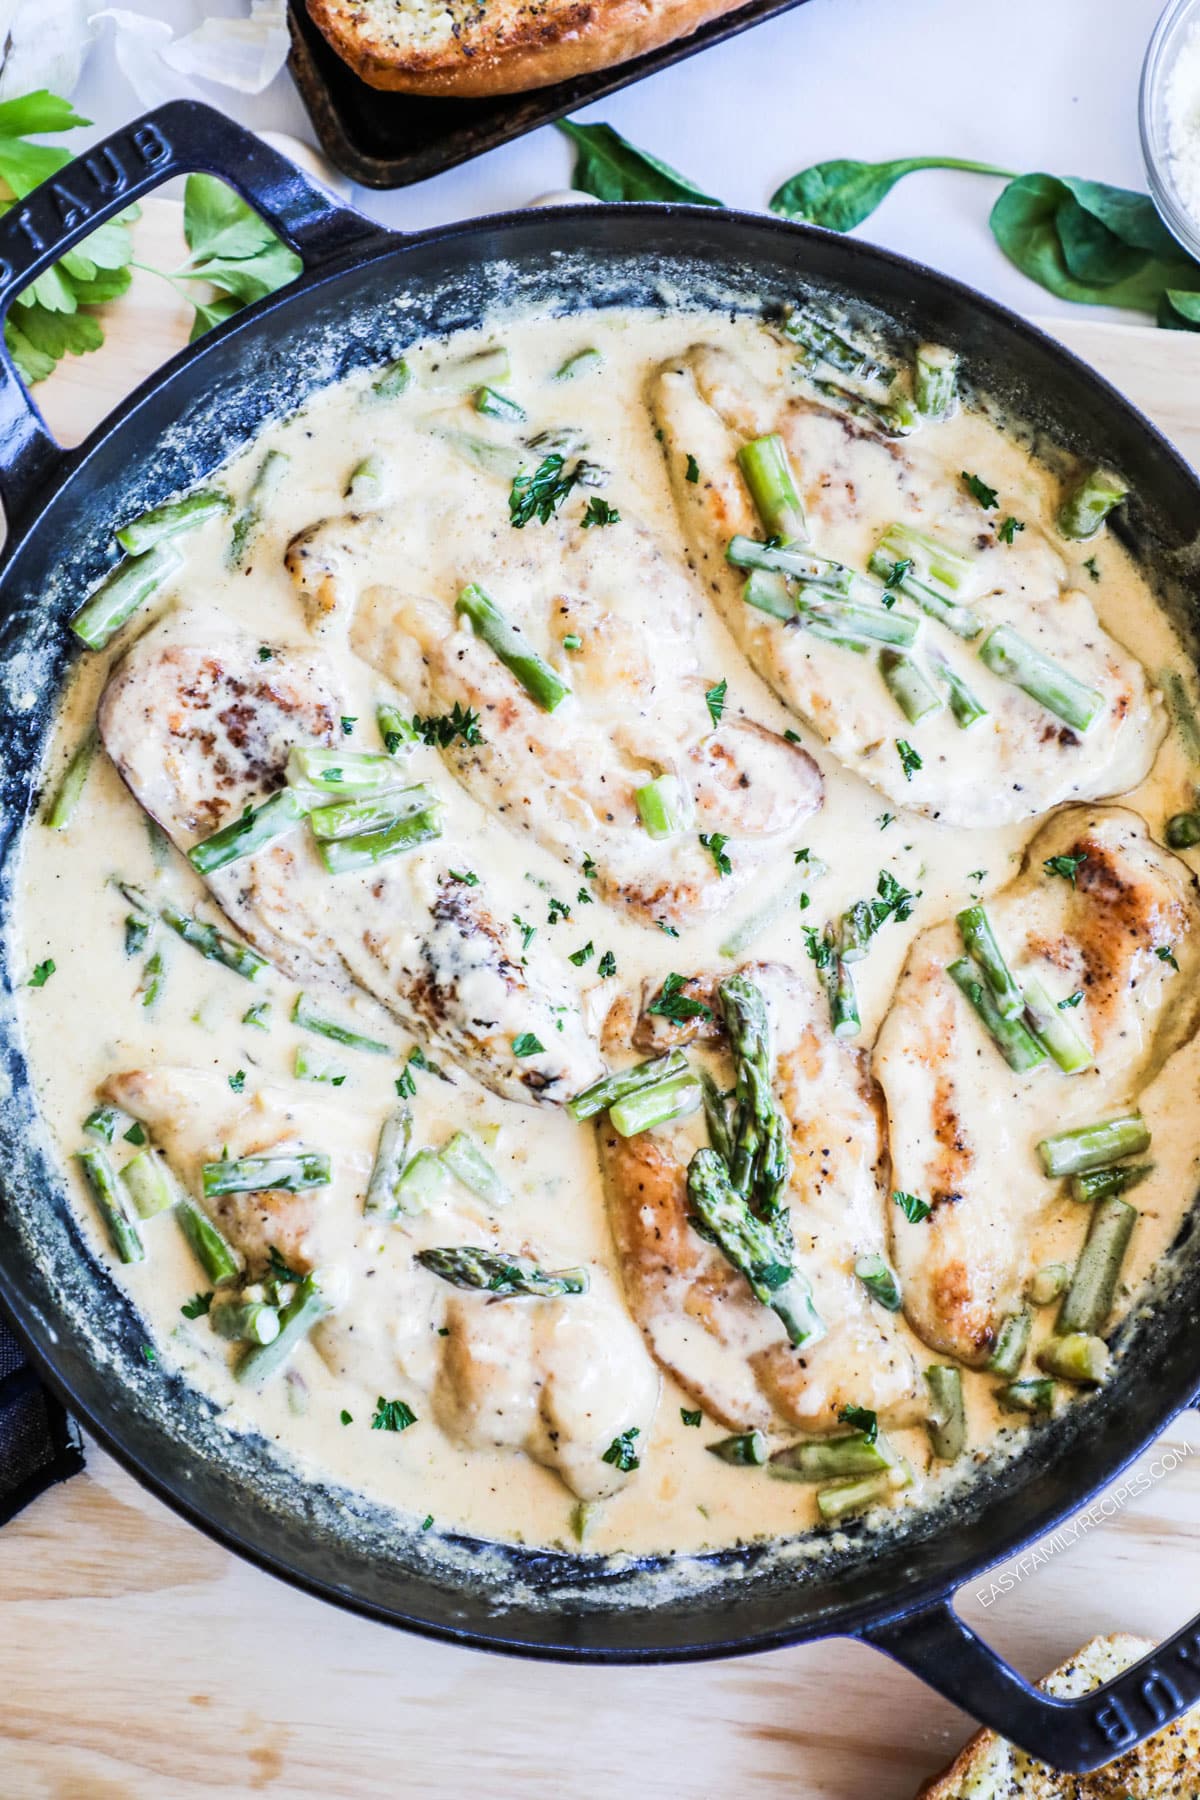 Chicken and Asparagus recipe in a skillet prepared and ready to serve